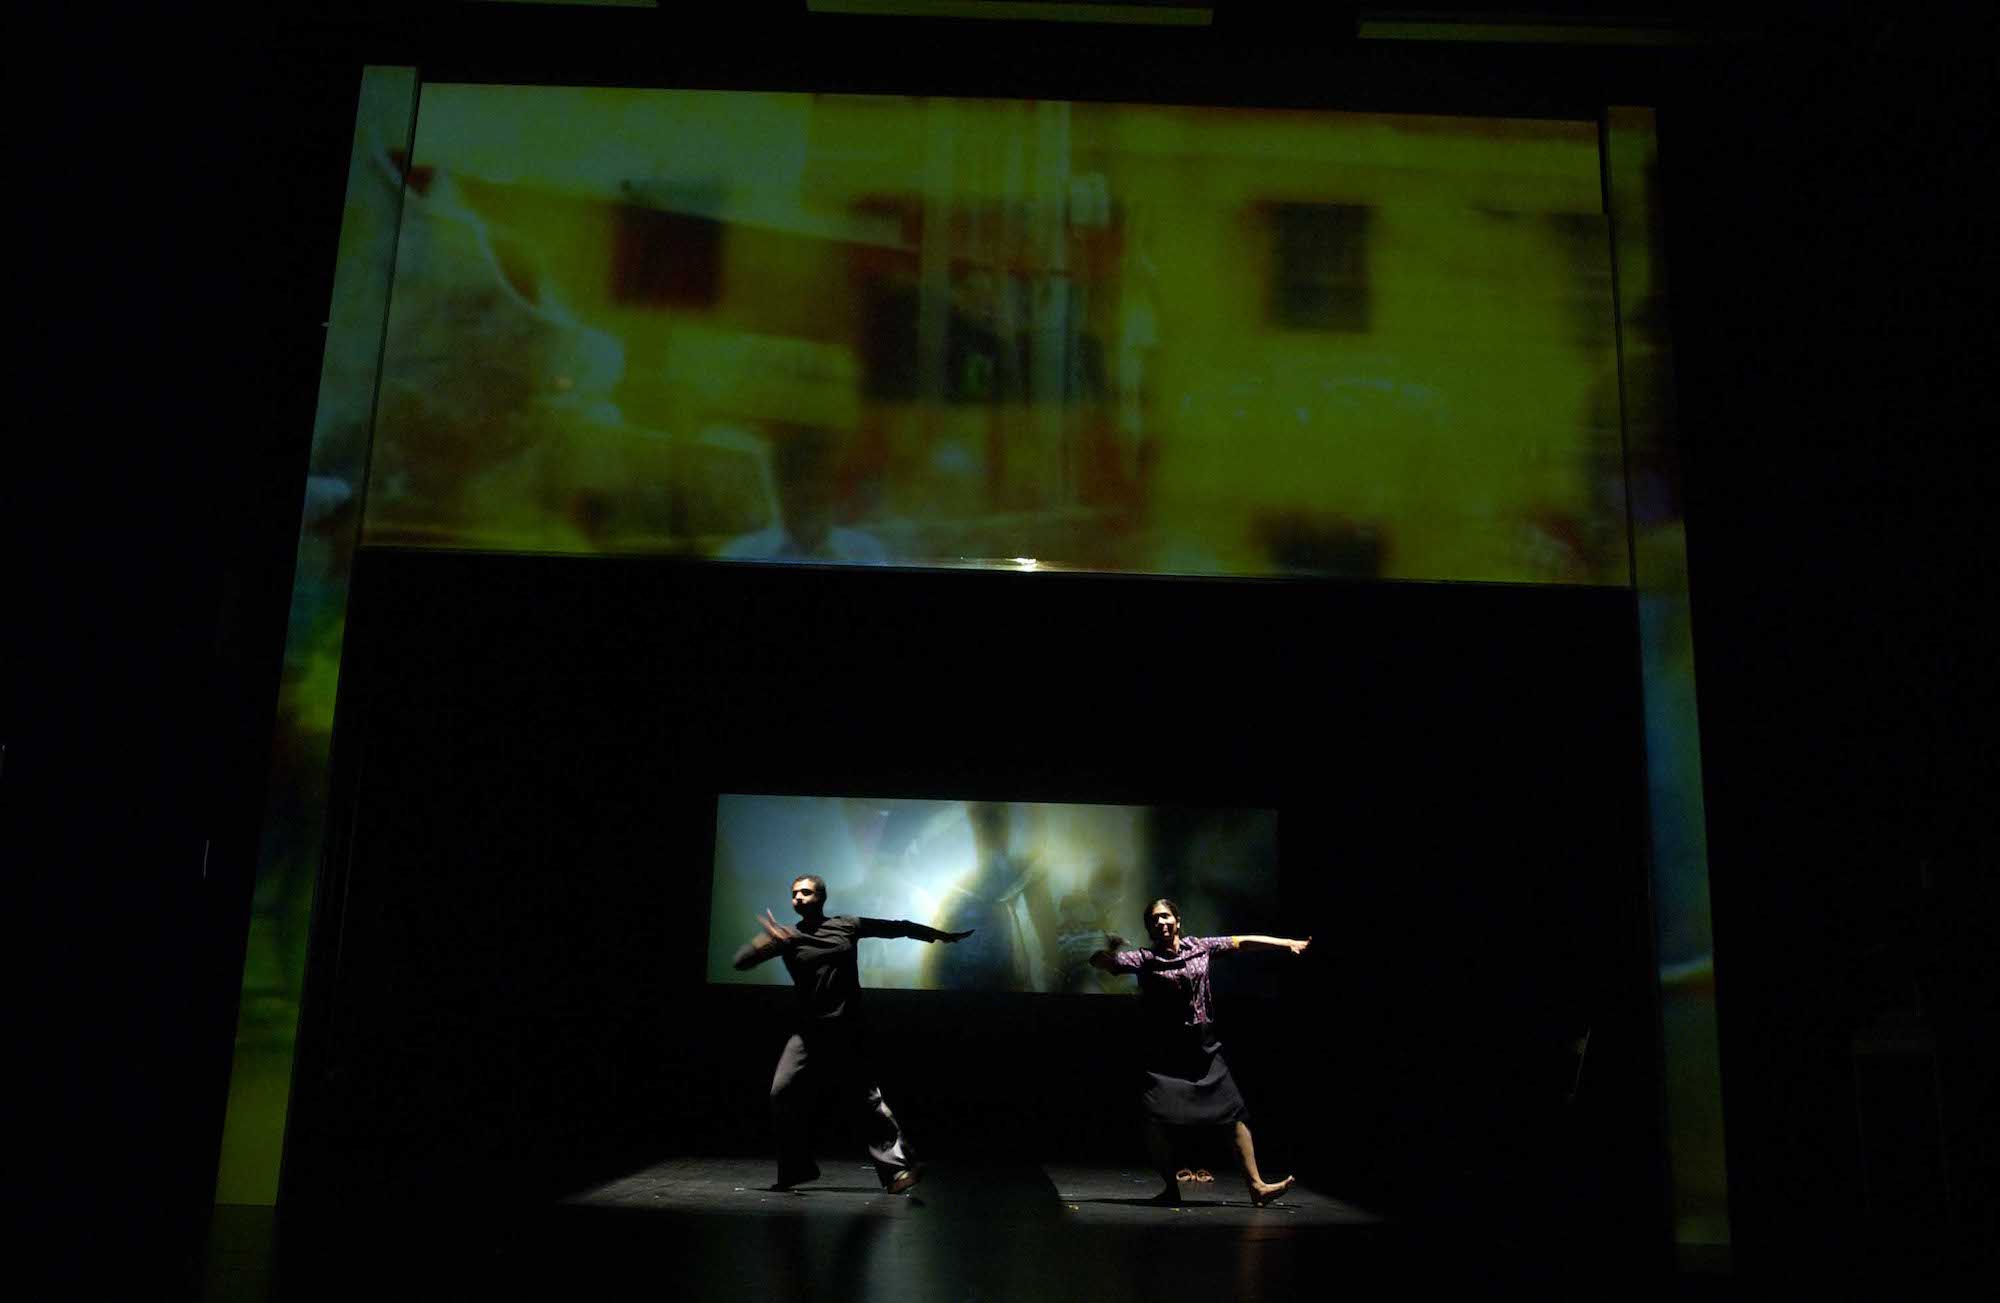 Two actors move in unison on a dark stage, with their left feet raised with the heel on the ground and their left arms out wide, while their right arm is tucked